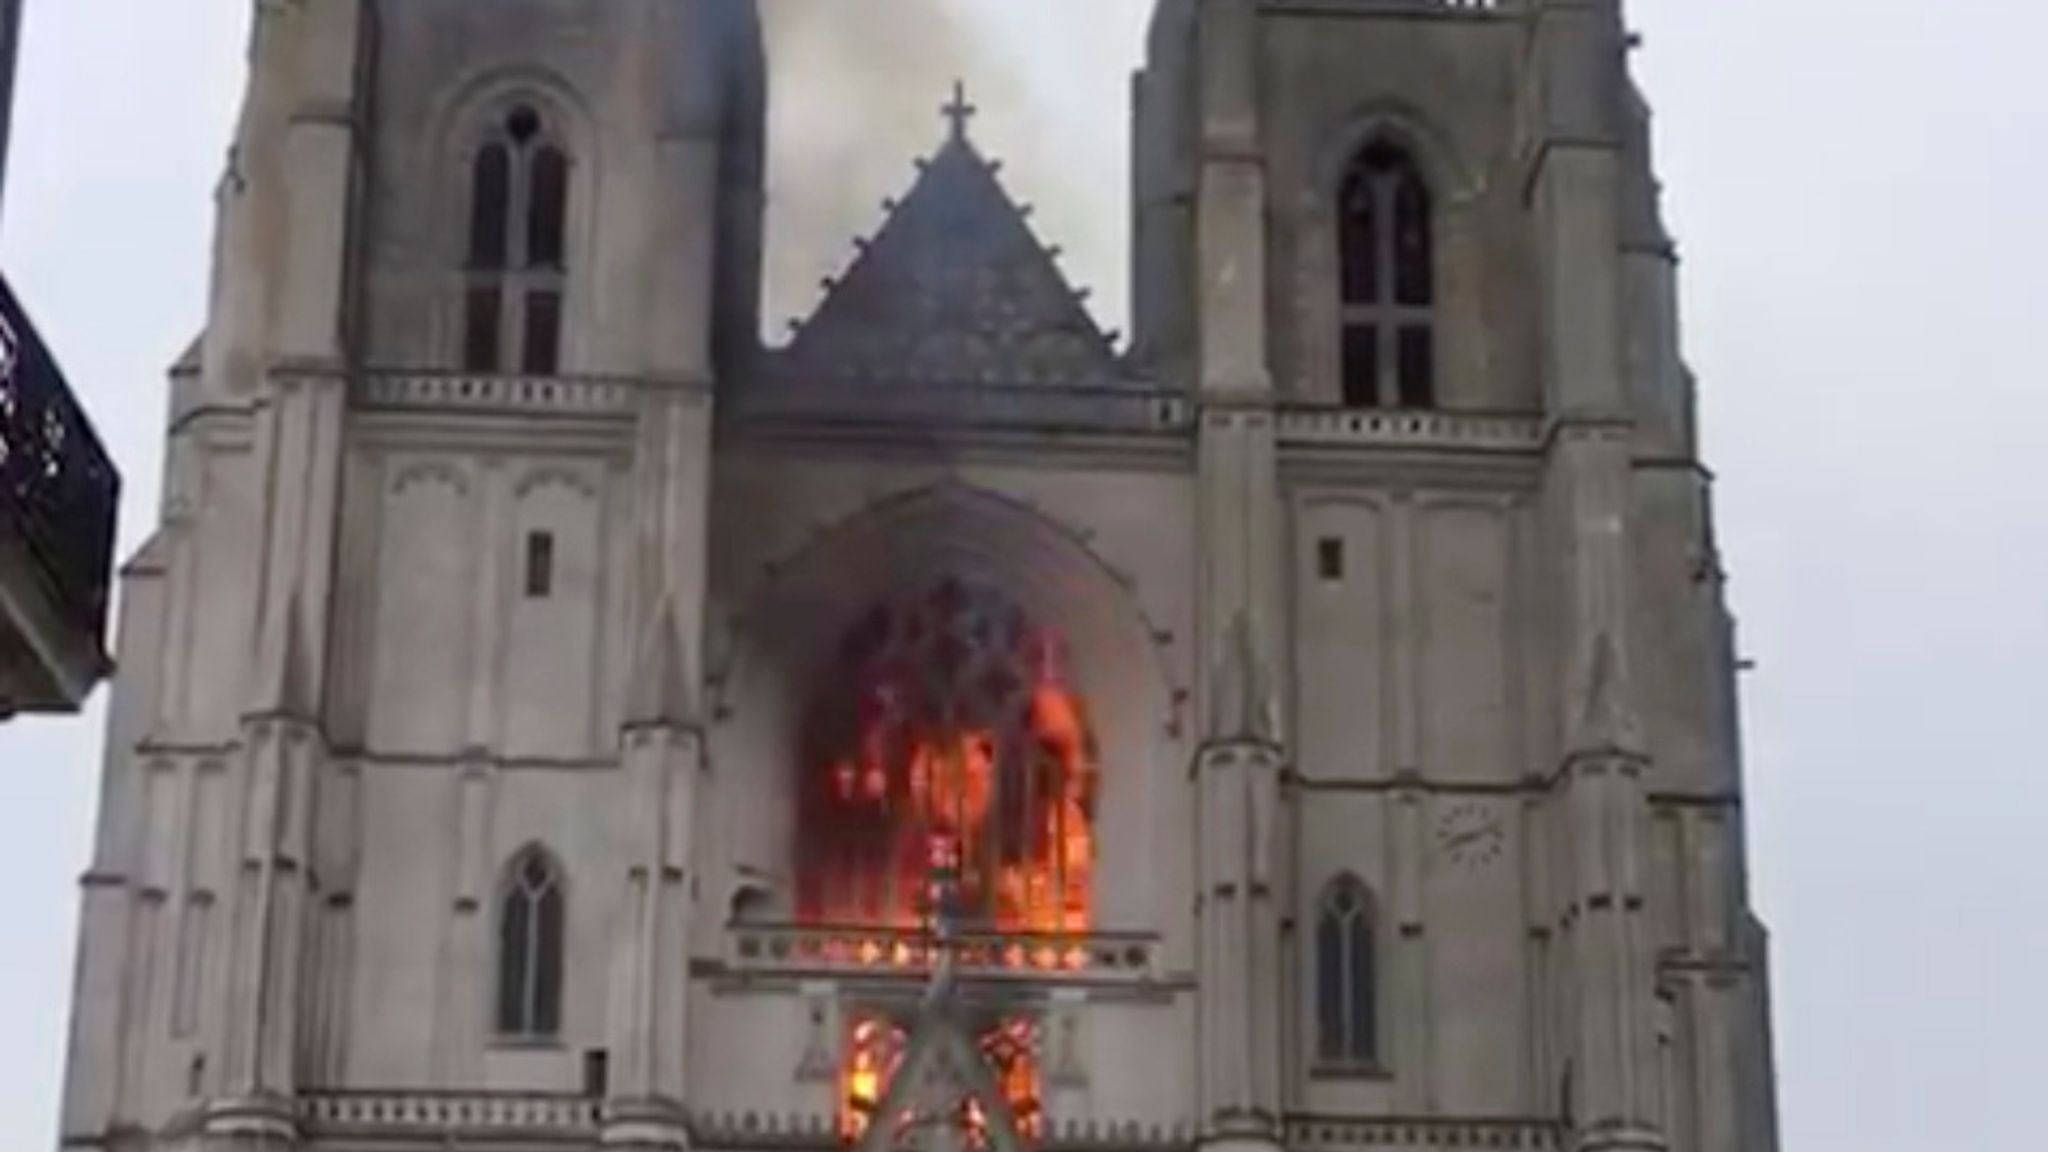 France: Rwandan Man Linked to Nantes Cathedral Fire Suspected of Murdering Priest